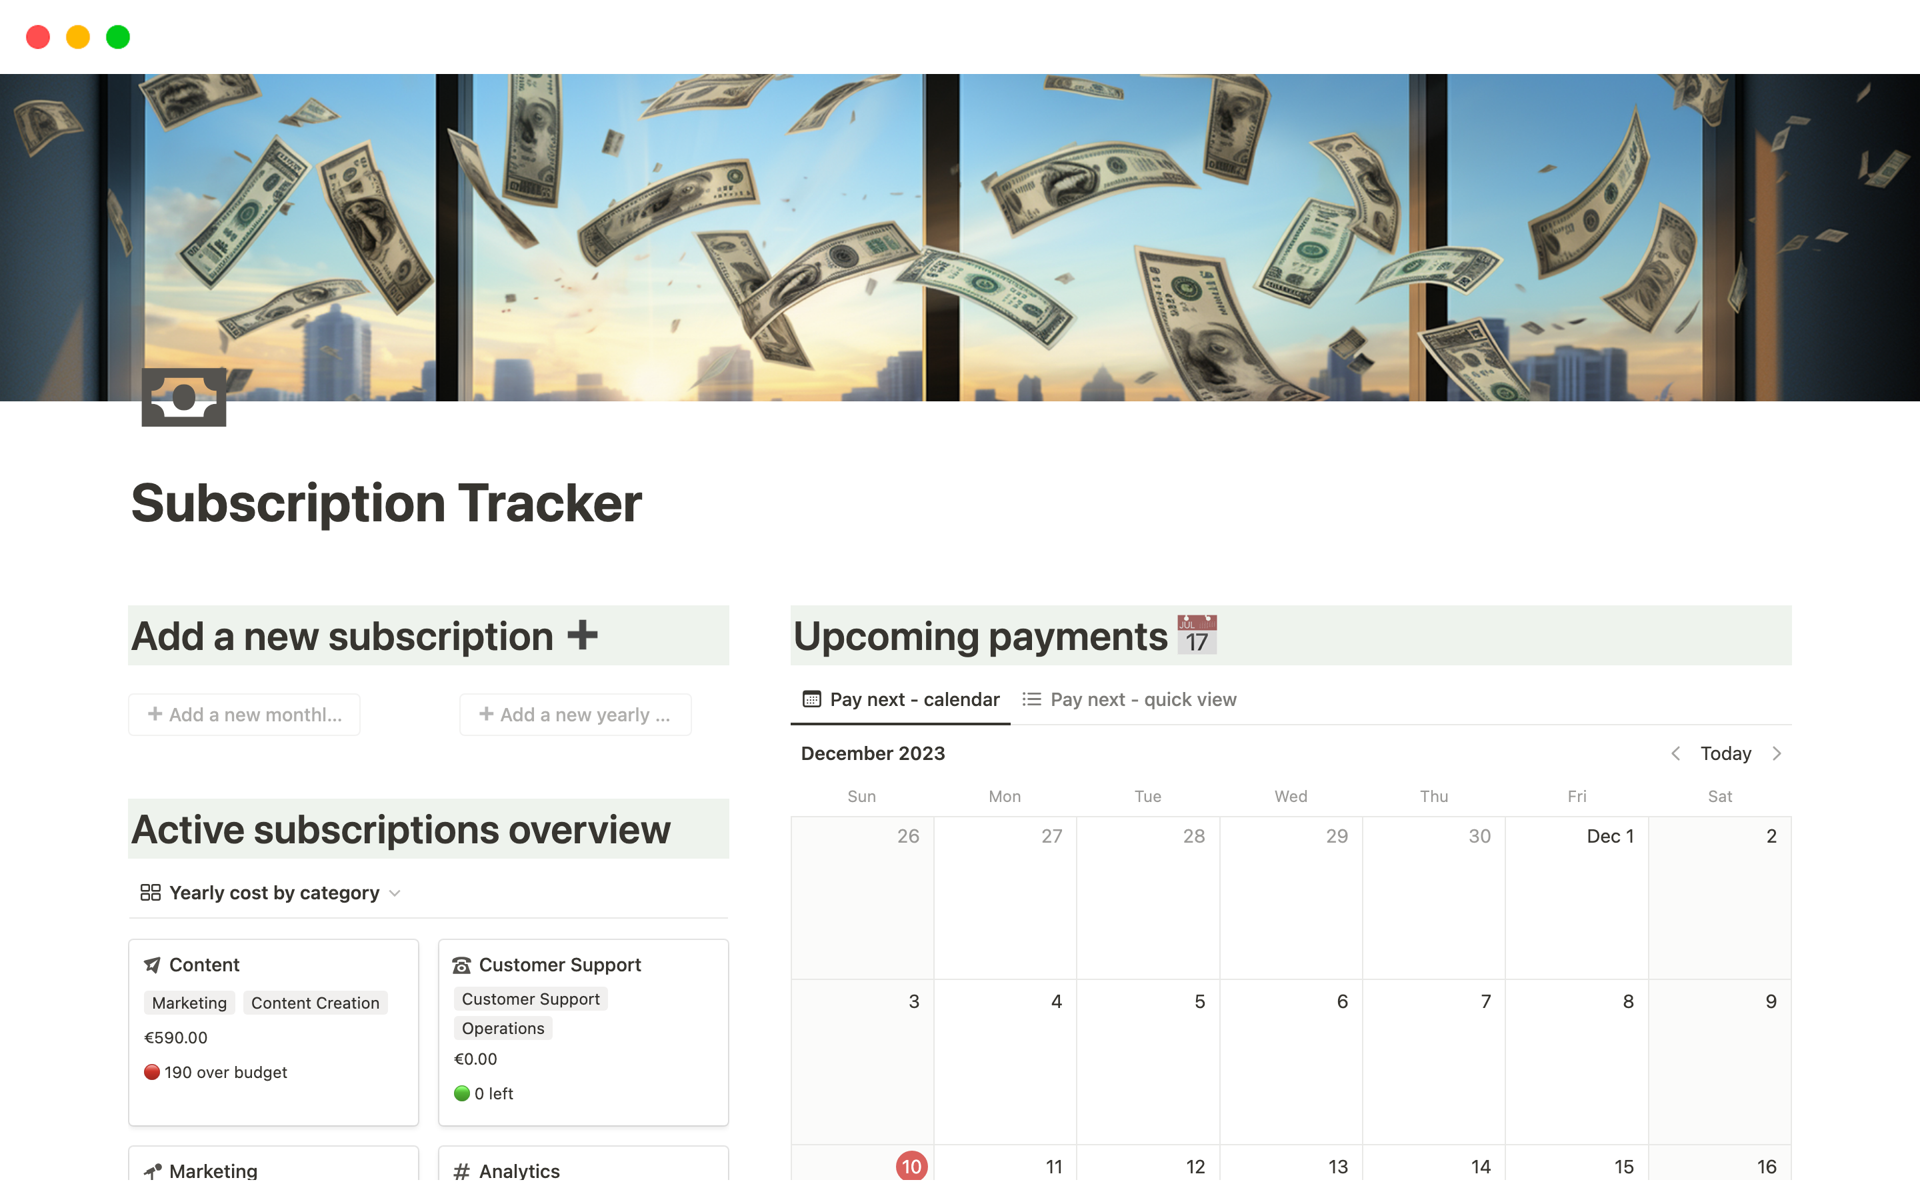 Keep track of all your subscriptions and recurring payments.